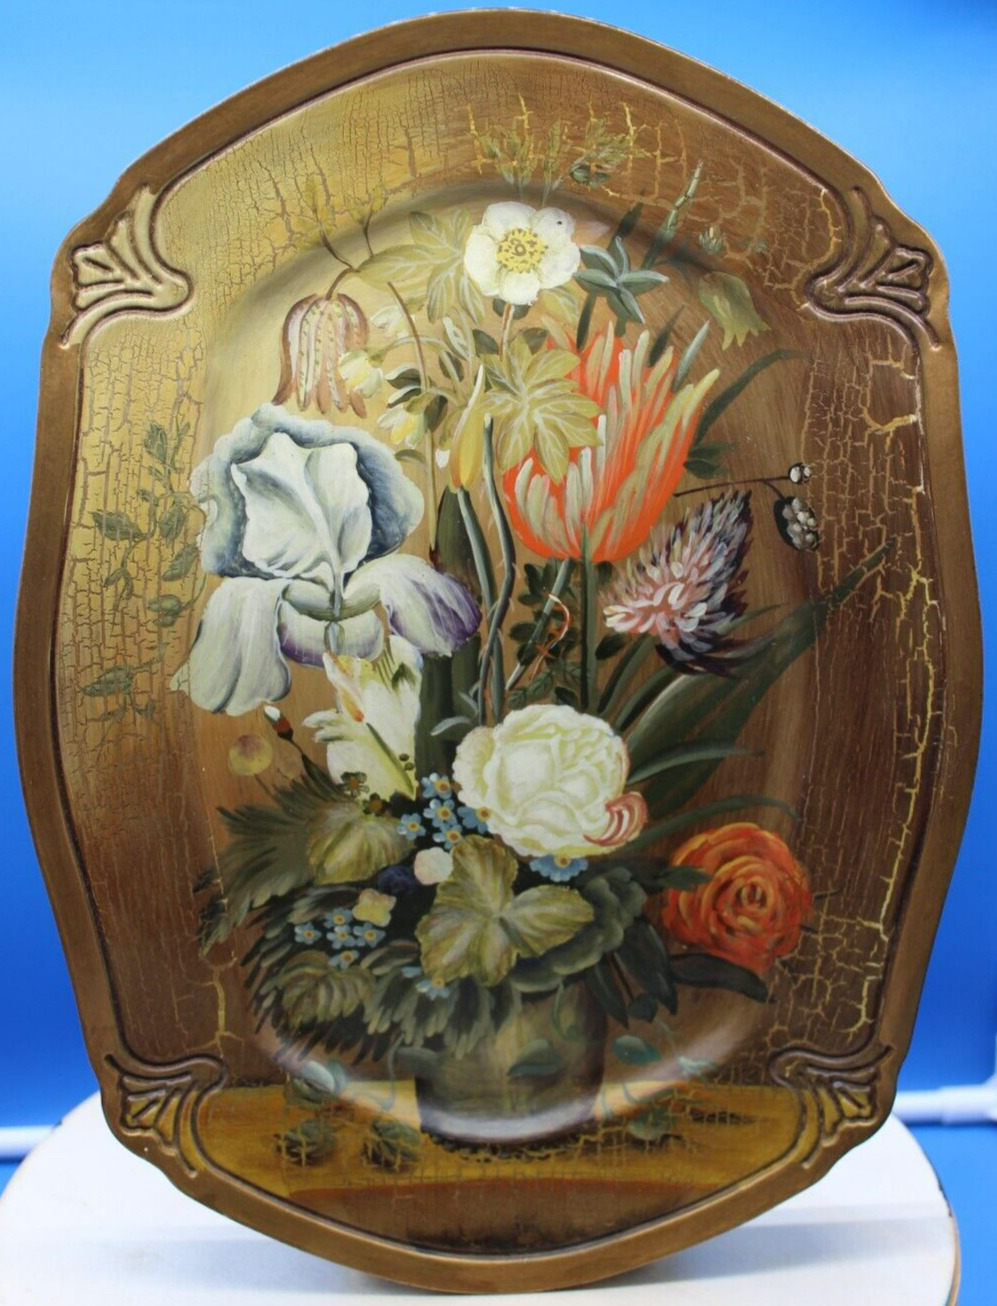 2005 Decorative Serving Tray with Iris Flowers - 14\